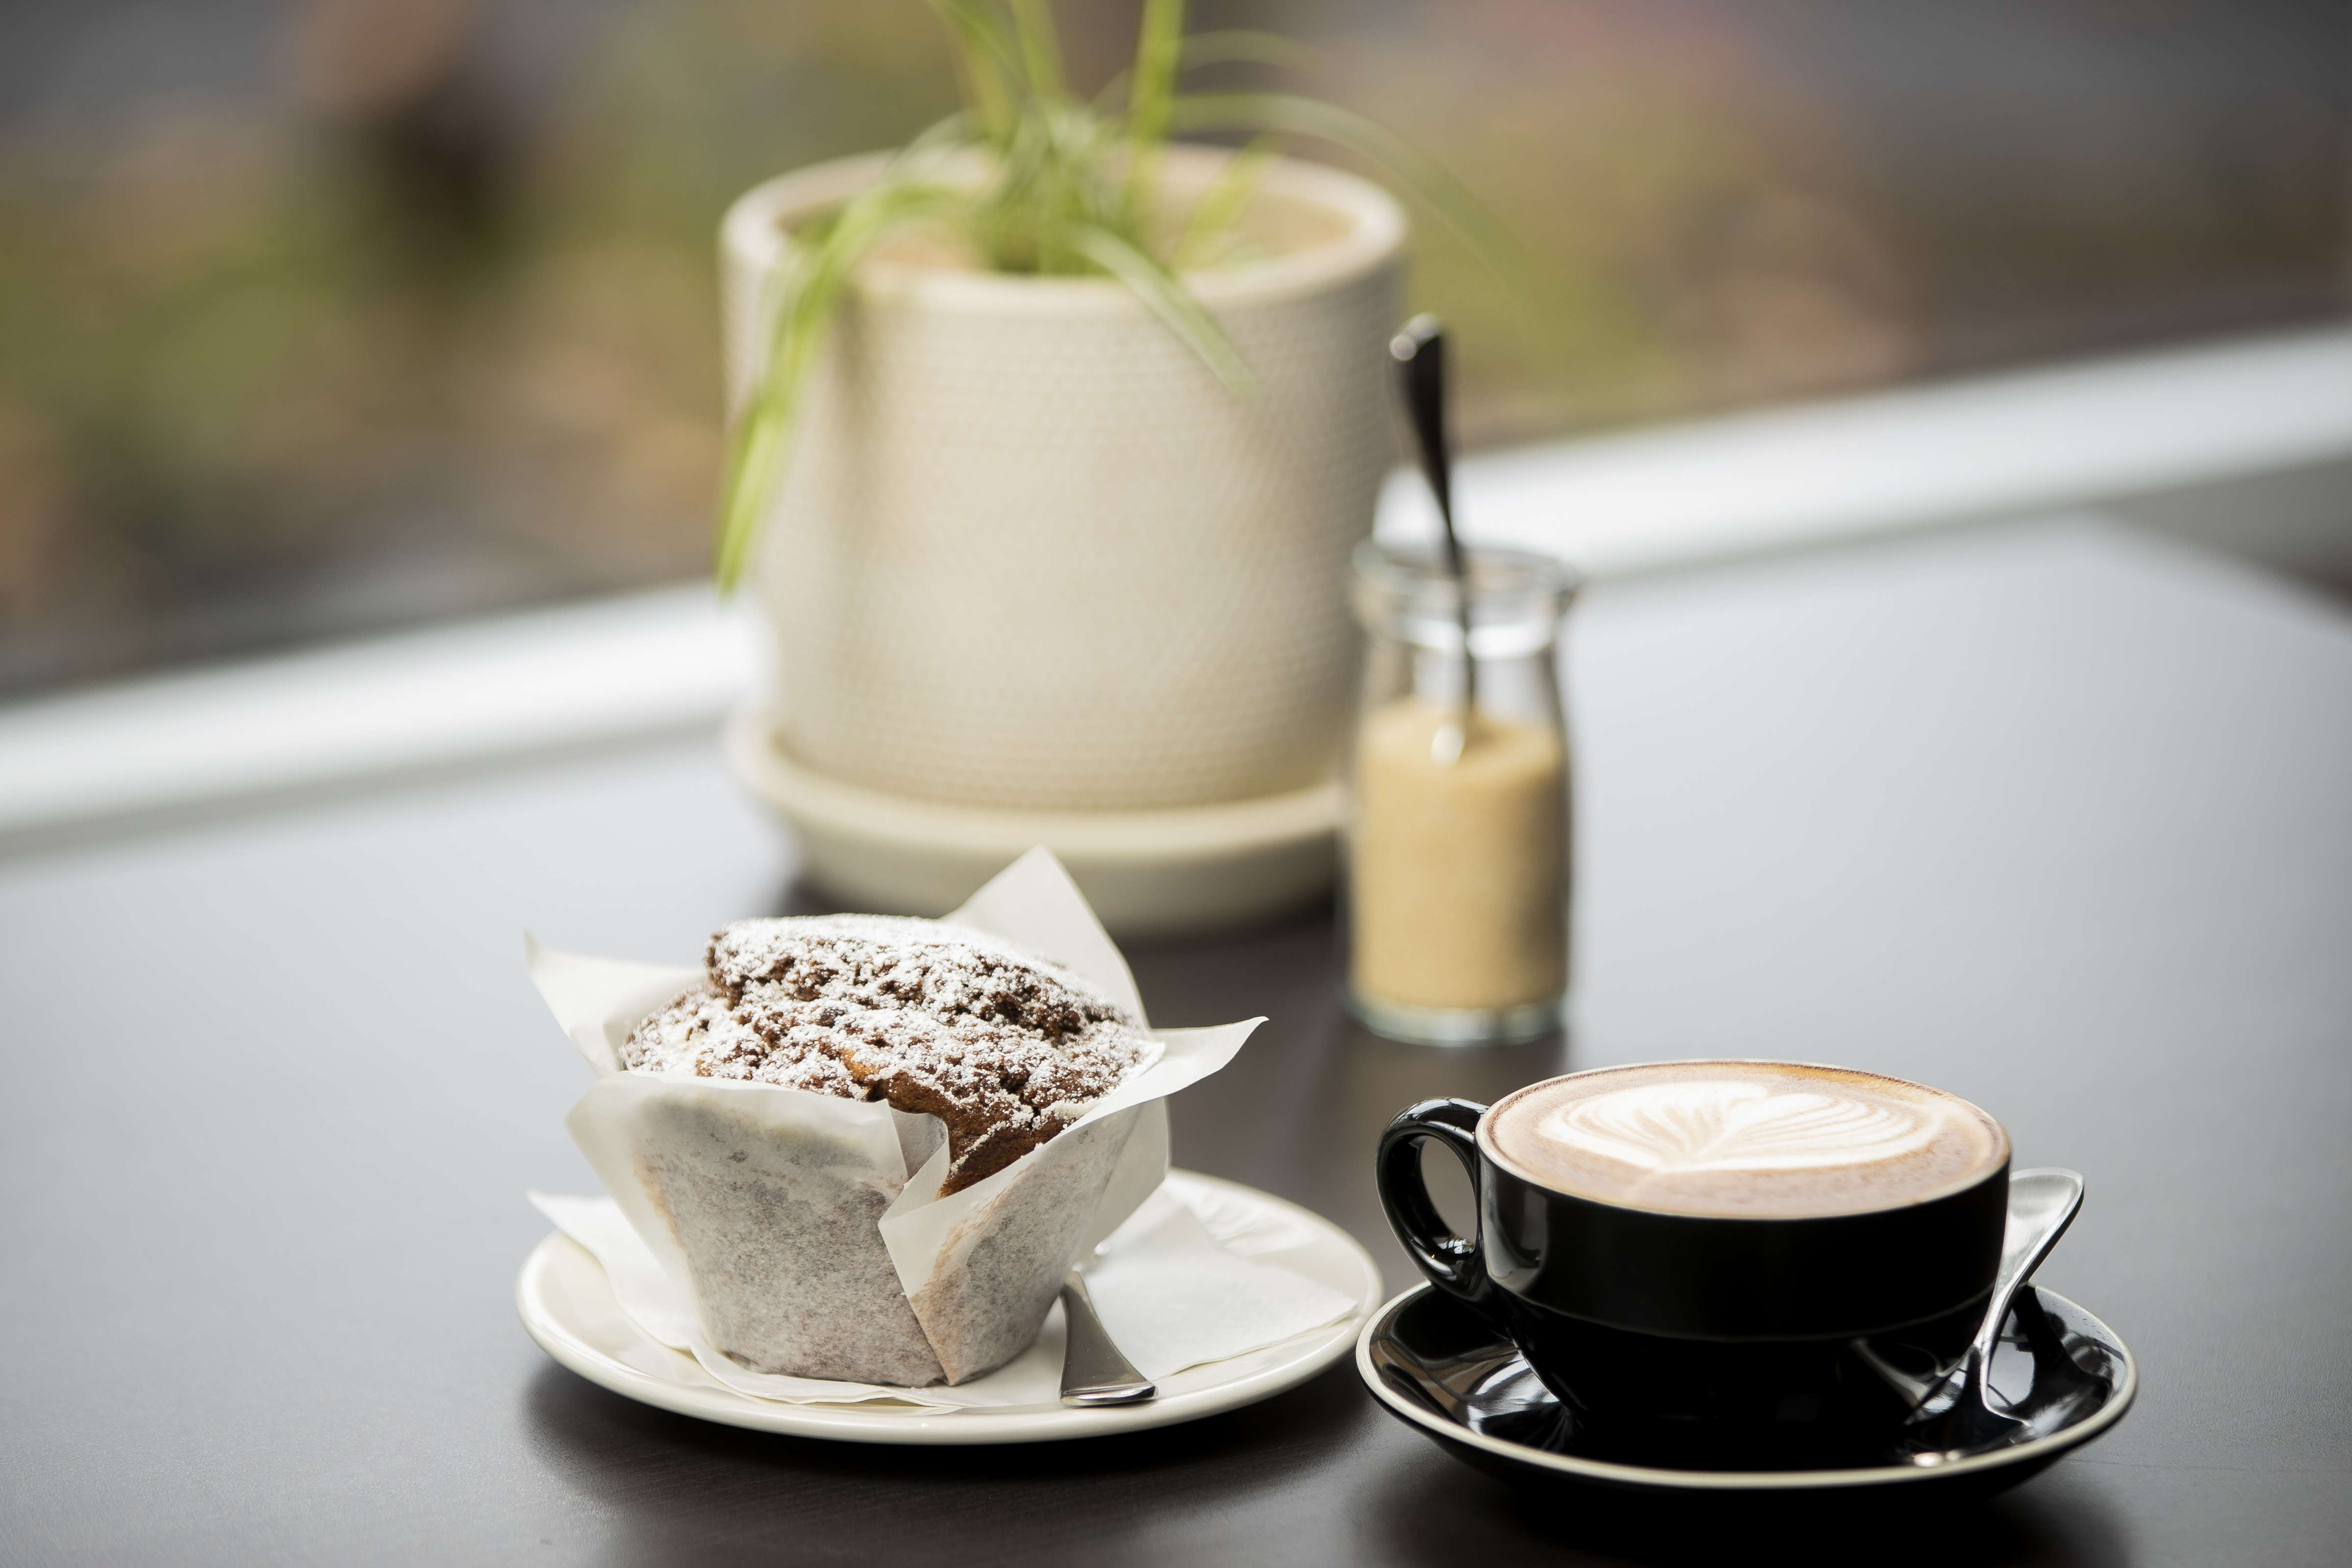 Flat white coffee and a chocolate muffin on a table. Photo: Richard Jupe.